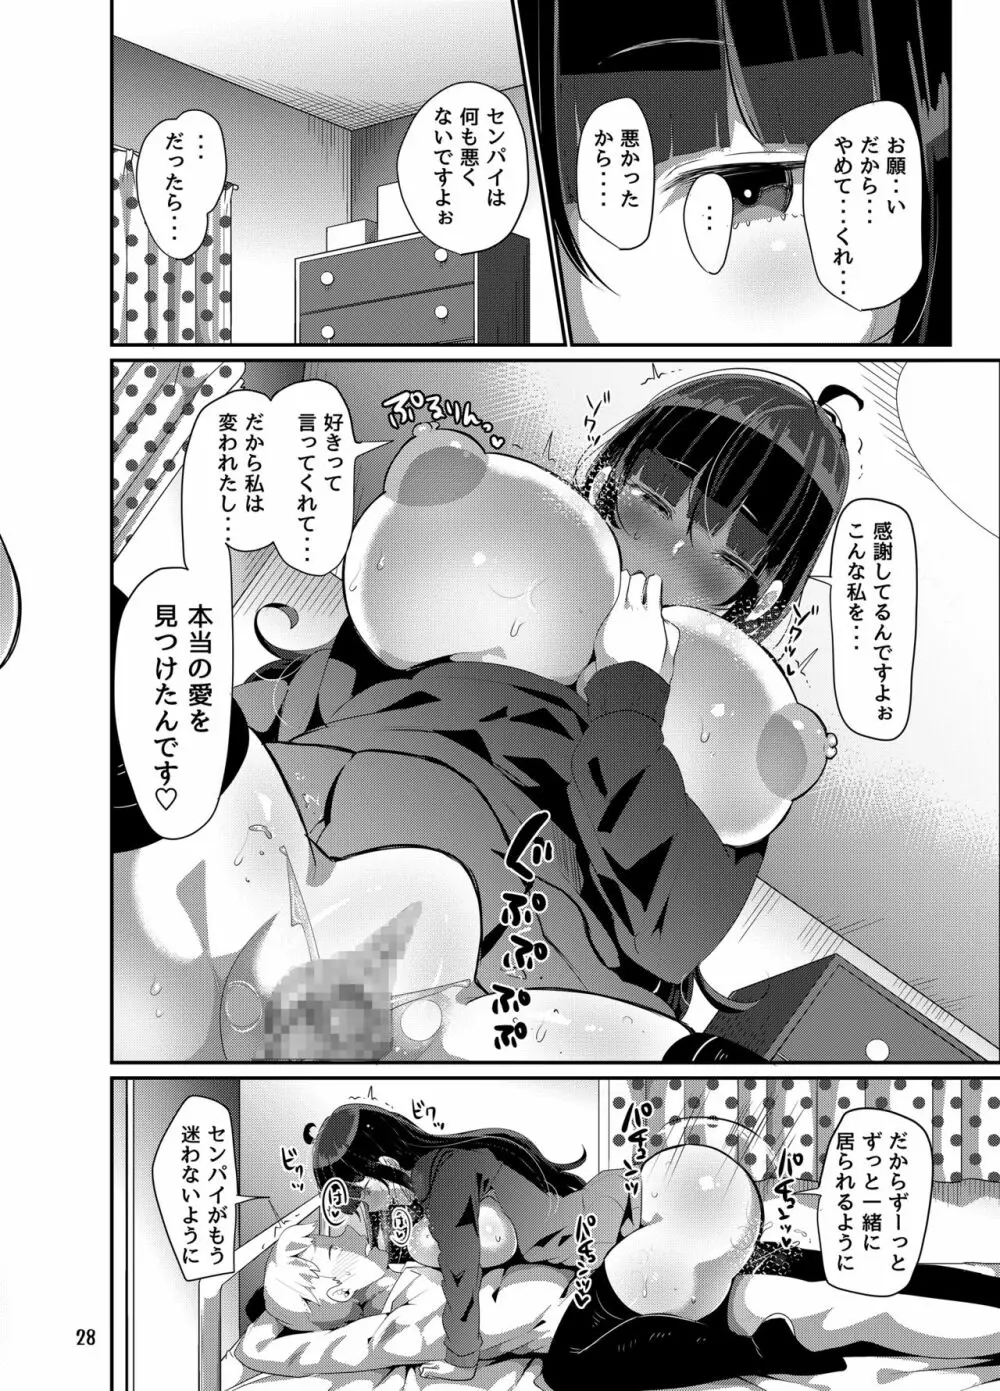 好き好き好き好き好き好き好き好き ver.5 - page29